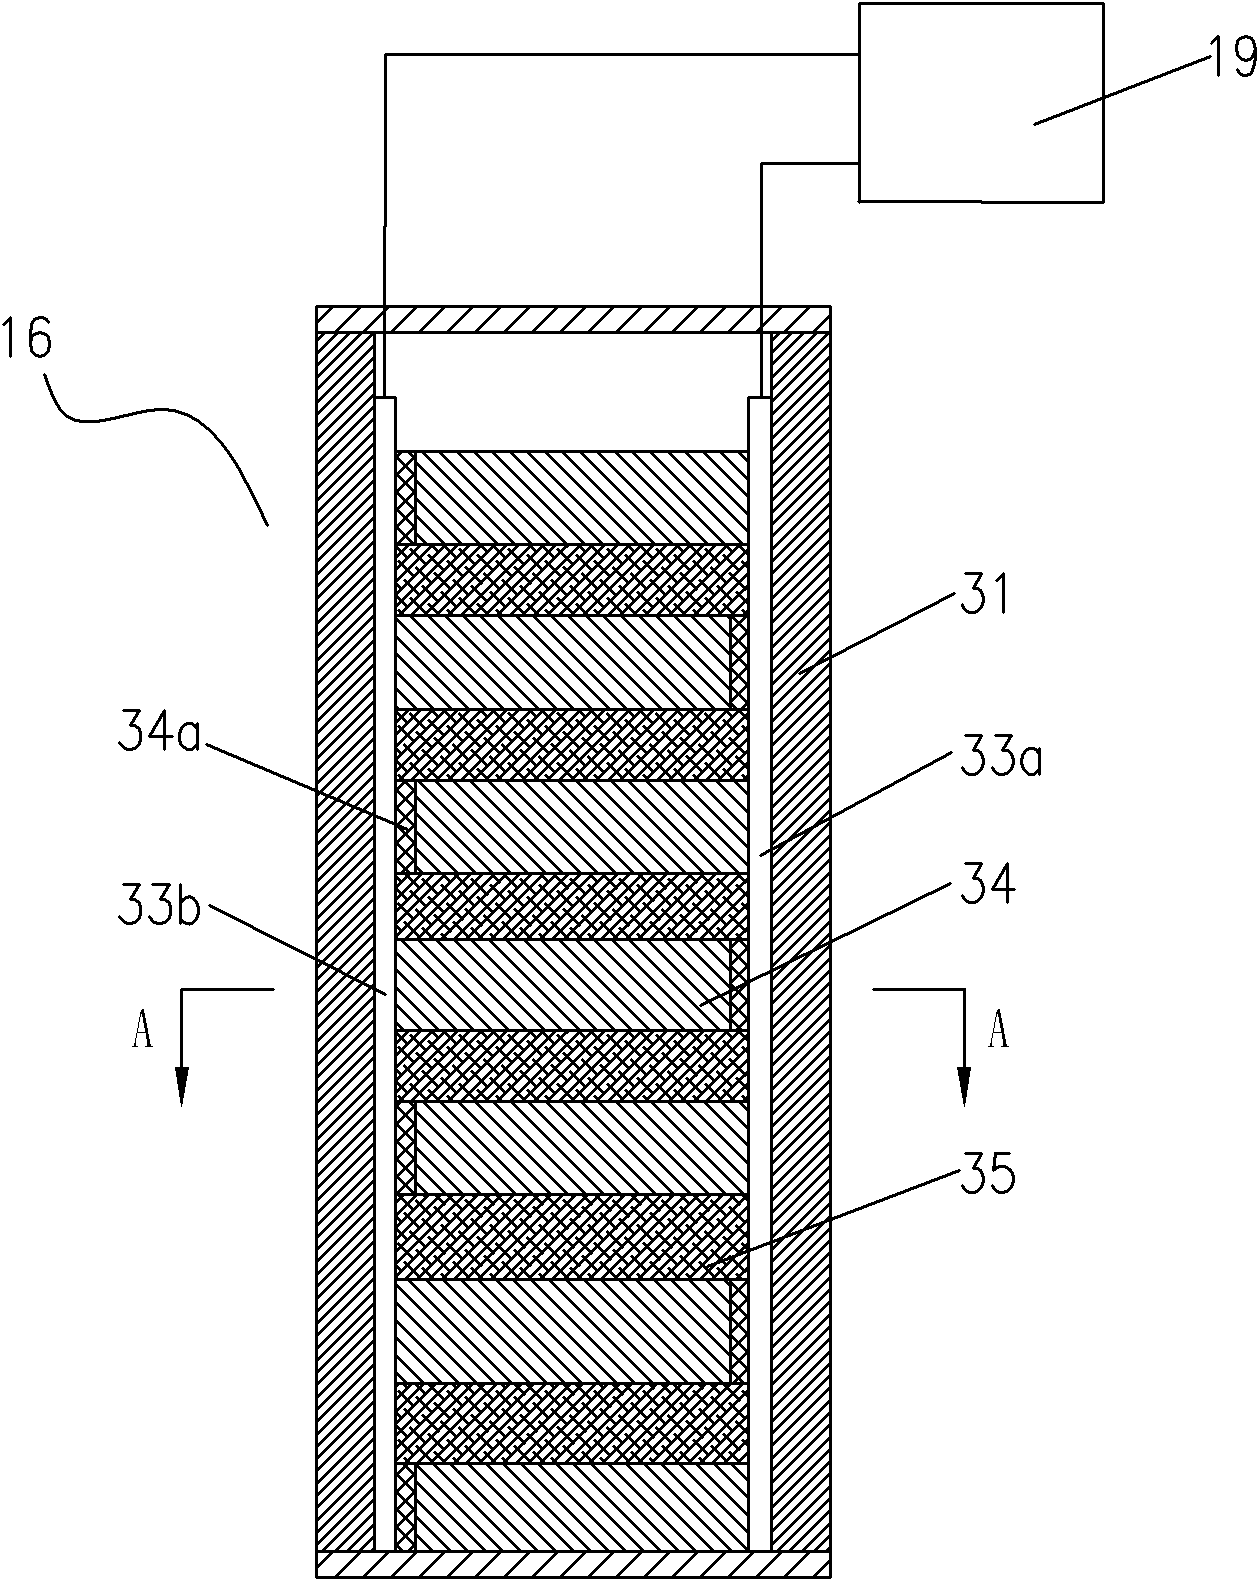 Apparatus and method for quickly converting swill to organic fertilizer